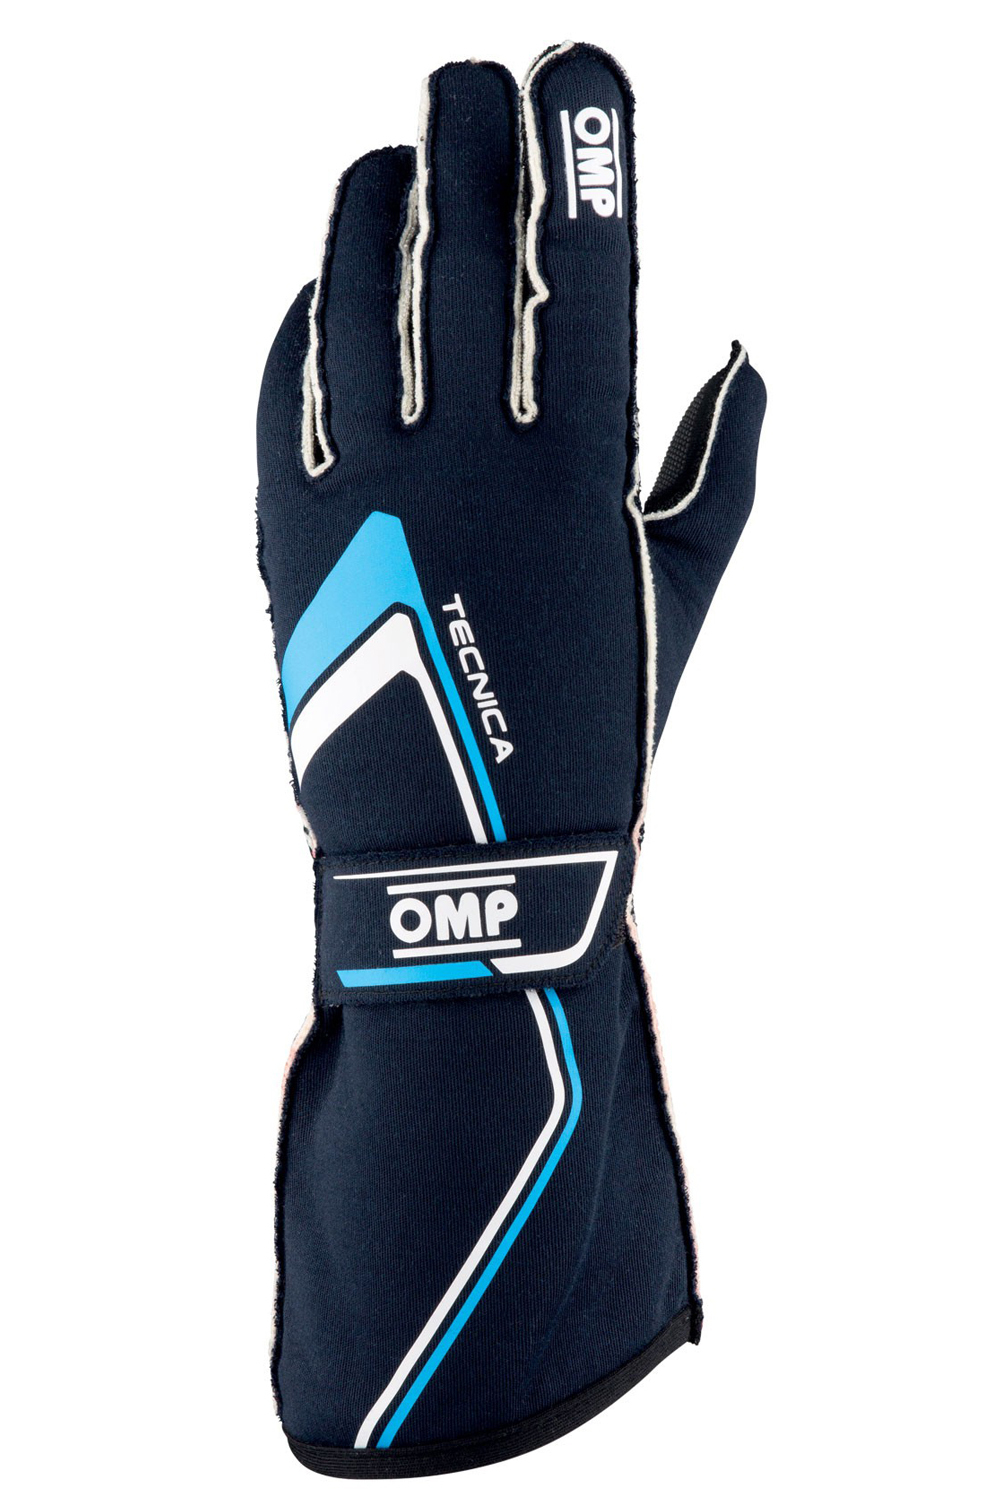 OMP Racing IB772BCXL - Gloves, Tecnica, Driving, FIA Approved, Double Layer, Fire Retardant Fabric, Blue / Cyan, X-Large, Pair